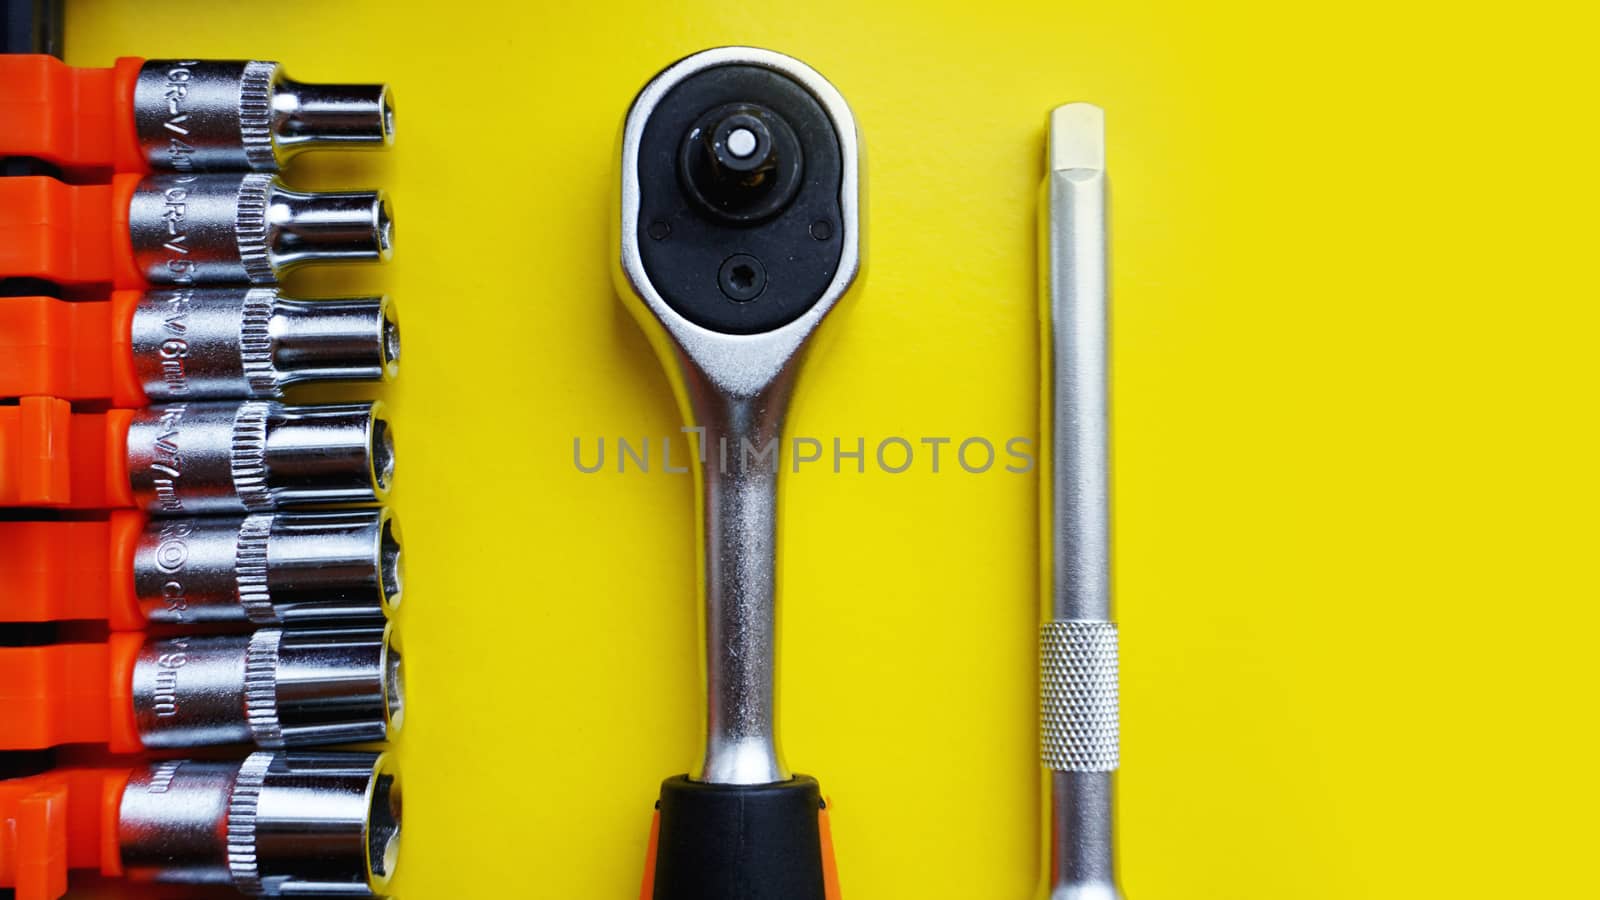 Wrench head bits for the screwdriver and other tools on bright yellow background by natali_brill